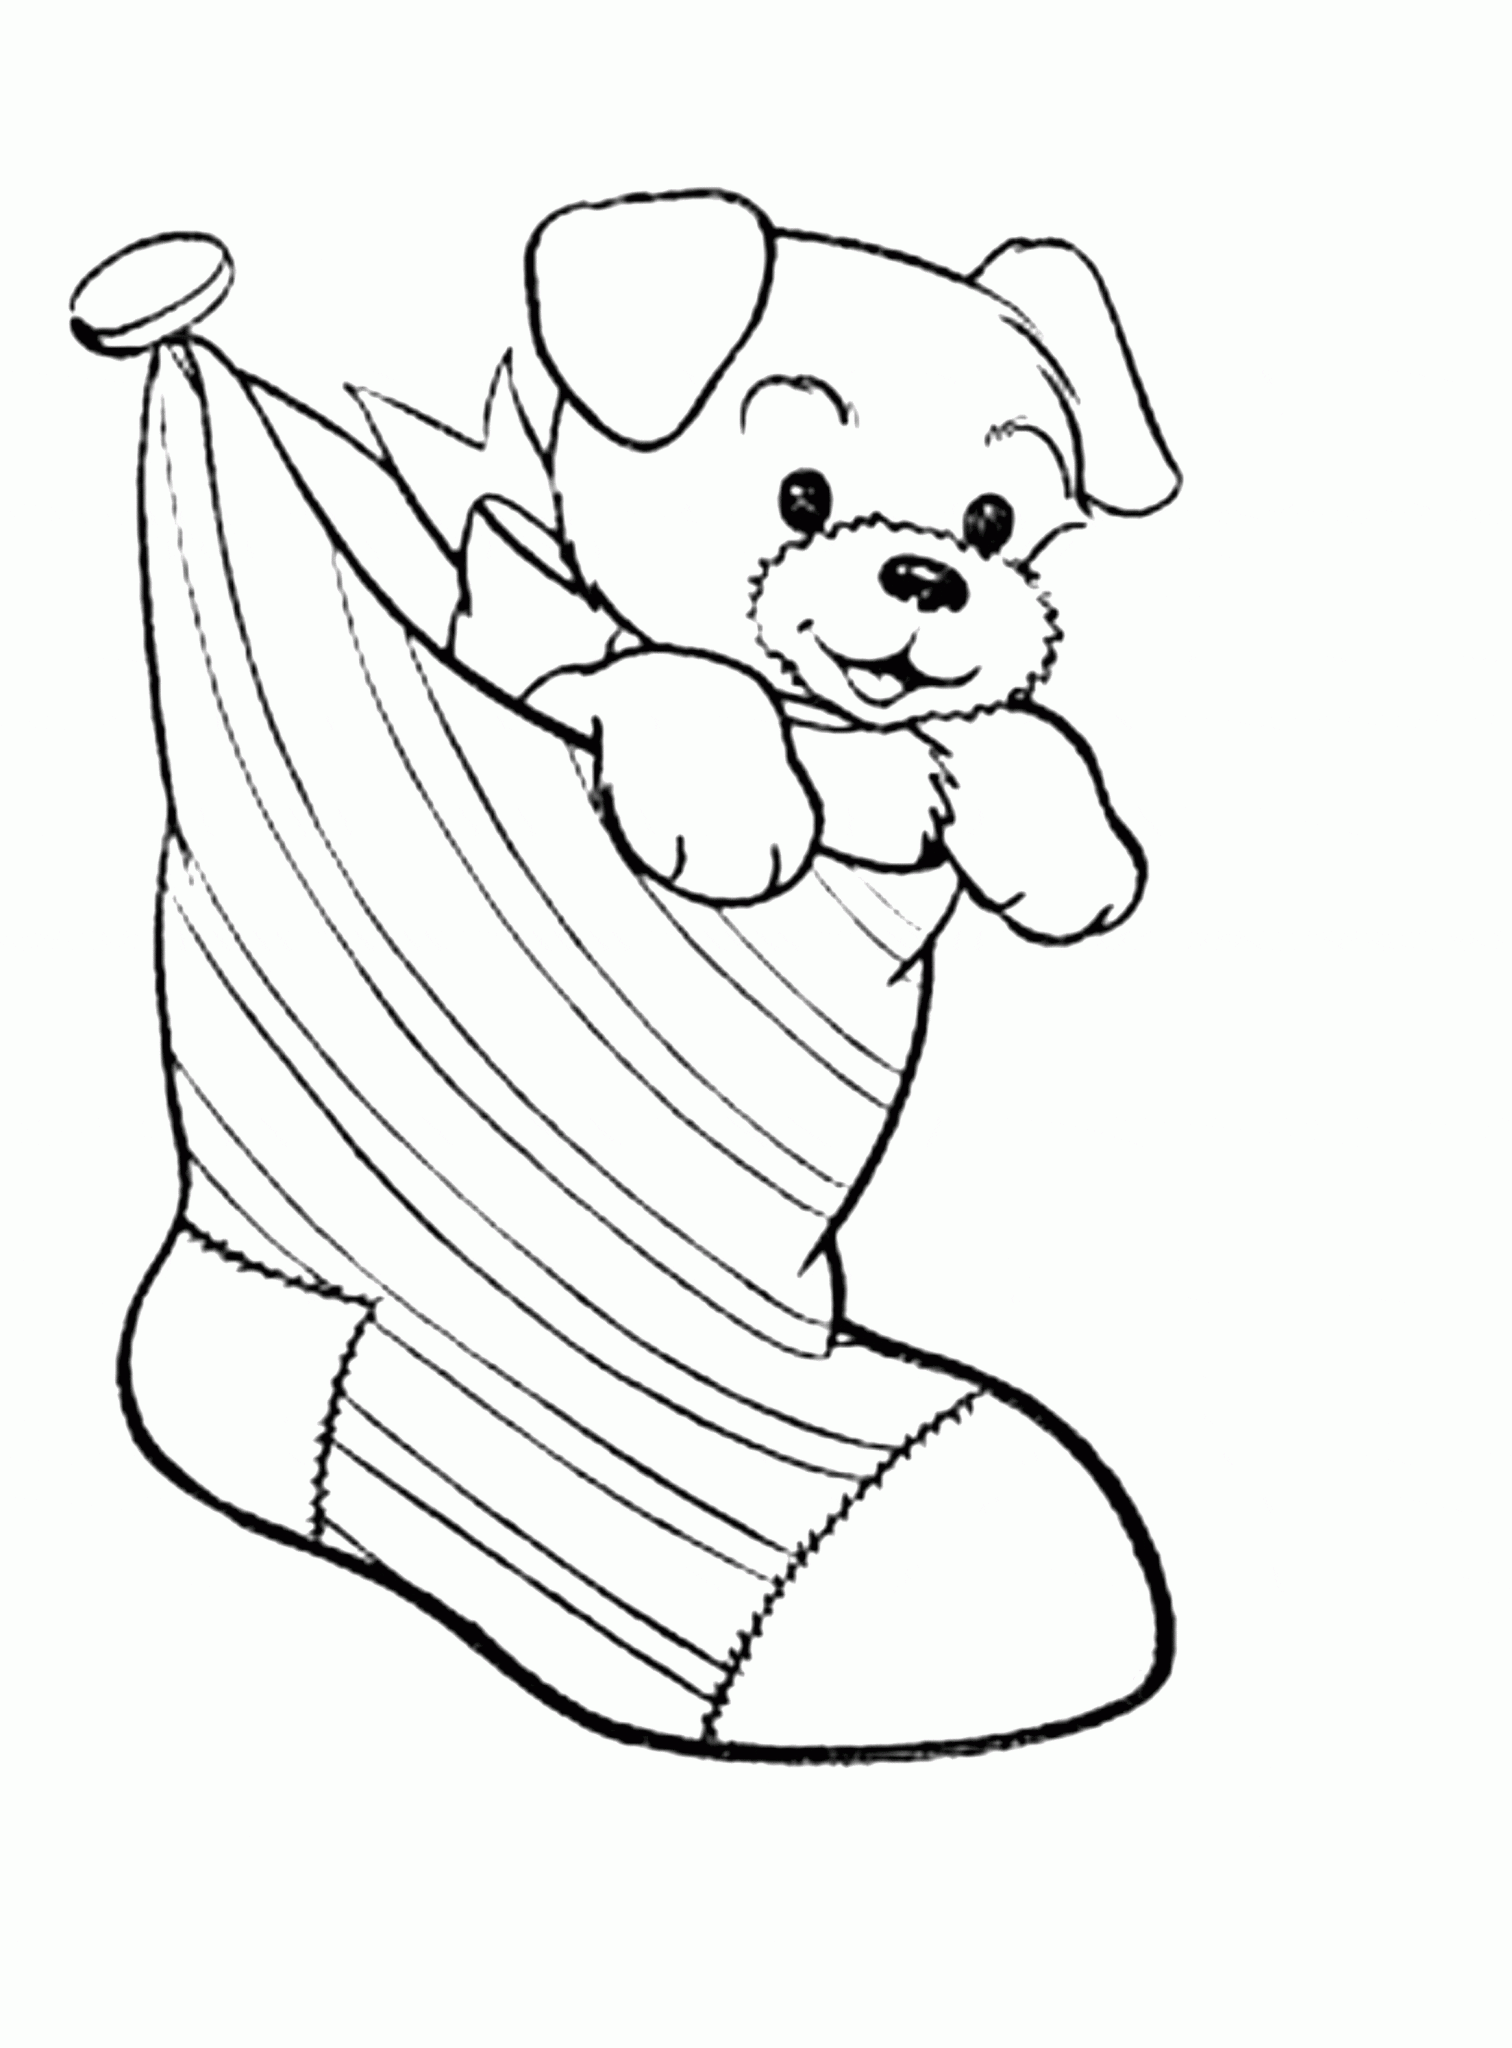 dogs coloring page print download draw your own puppy coloring pages page coloring dogs 